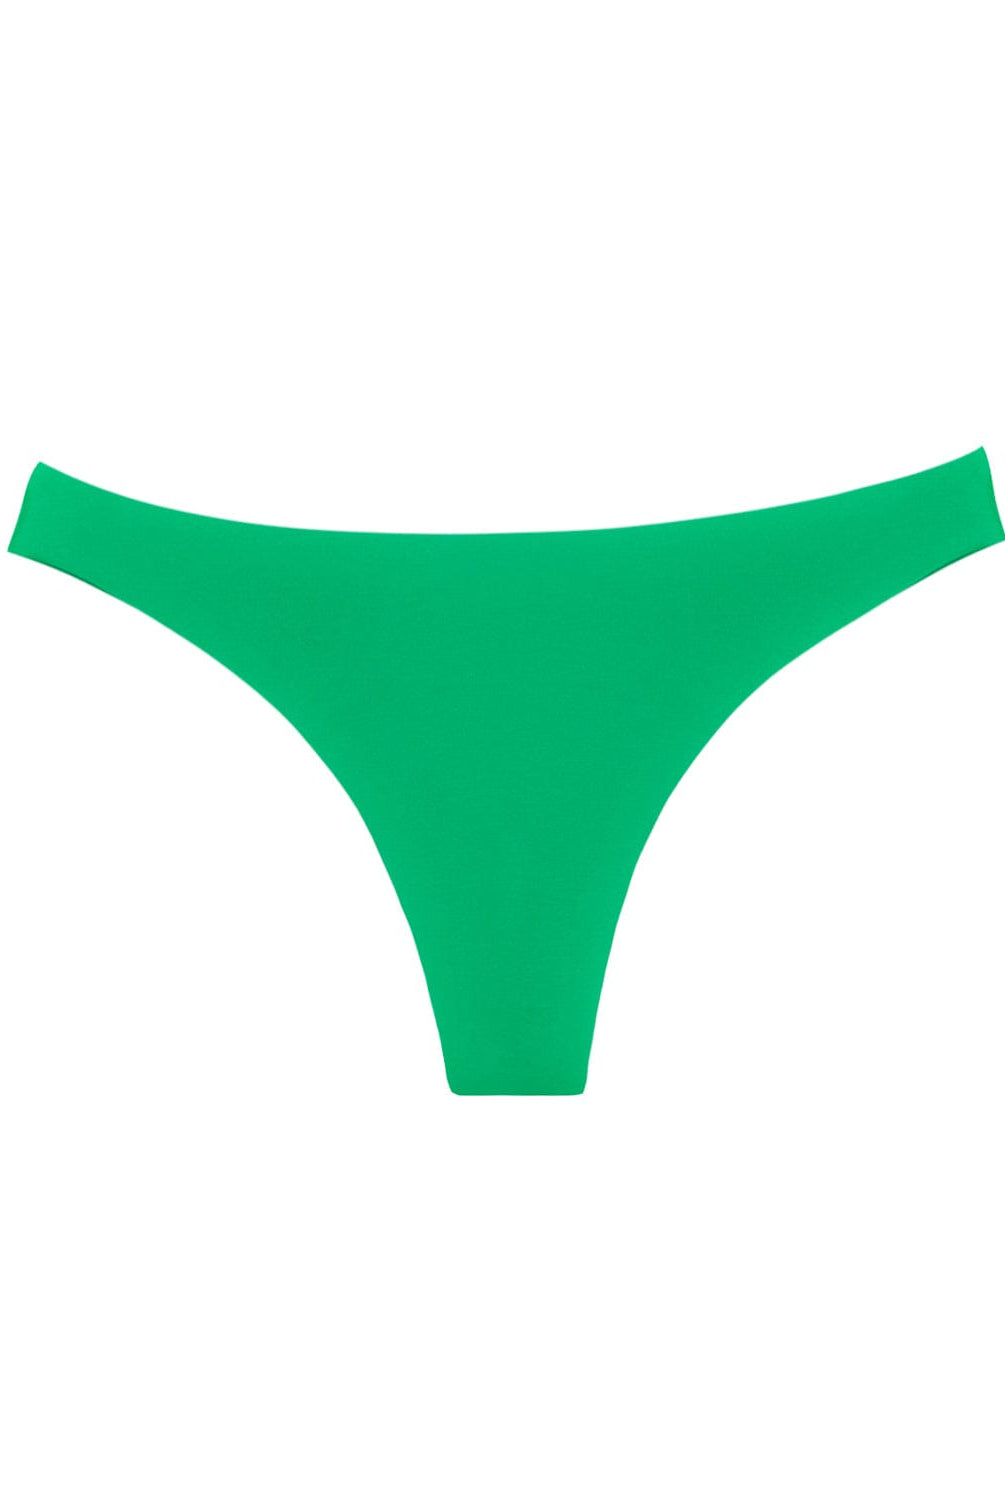 A green ruched bikini bottom. Featured against a white wall background.